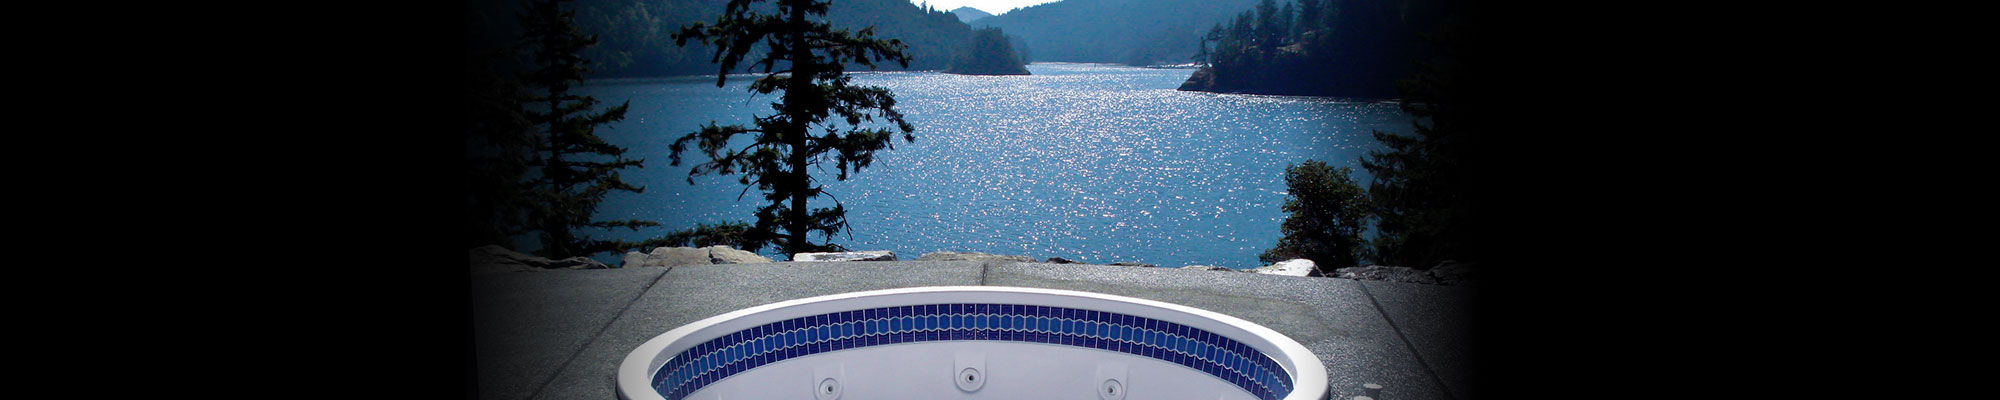 Coast Spas Patented Infinity Edge Hot Tub Compared to Standard Hot Tub